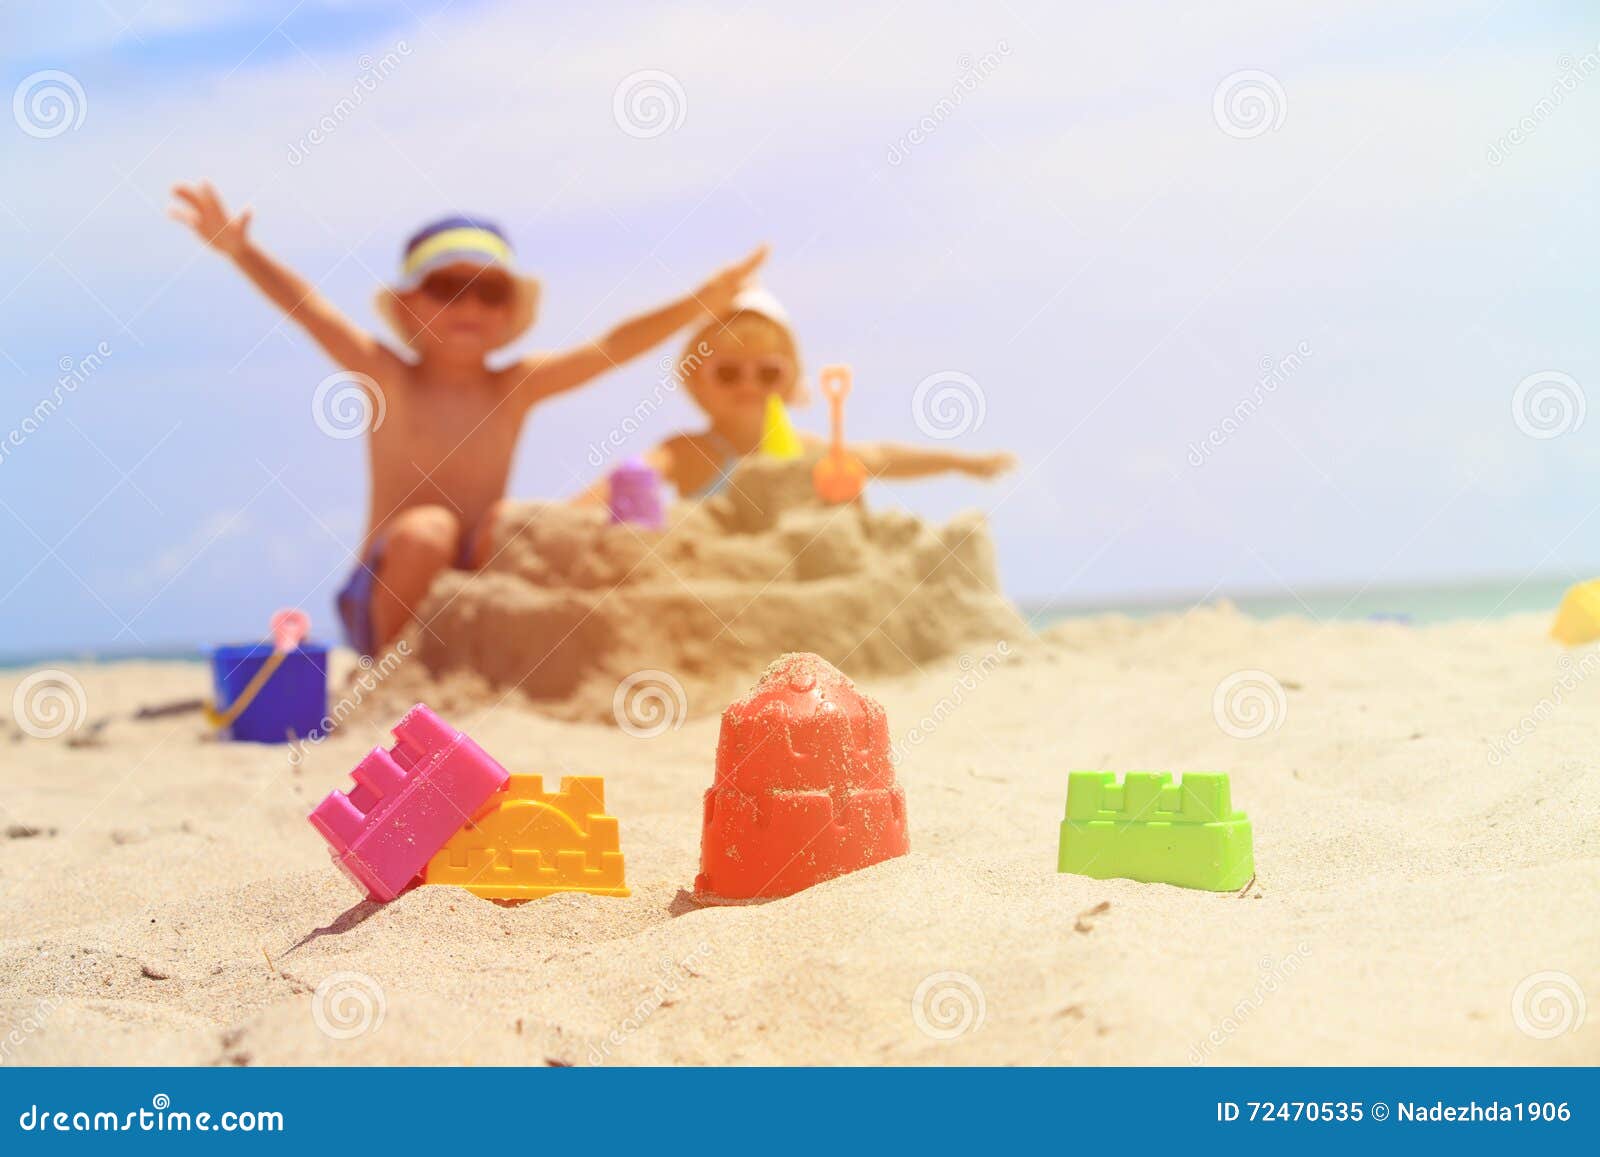 Little Boy and Toddler Girl Play with Sand on Beach Stock Image - Image ...